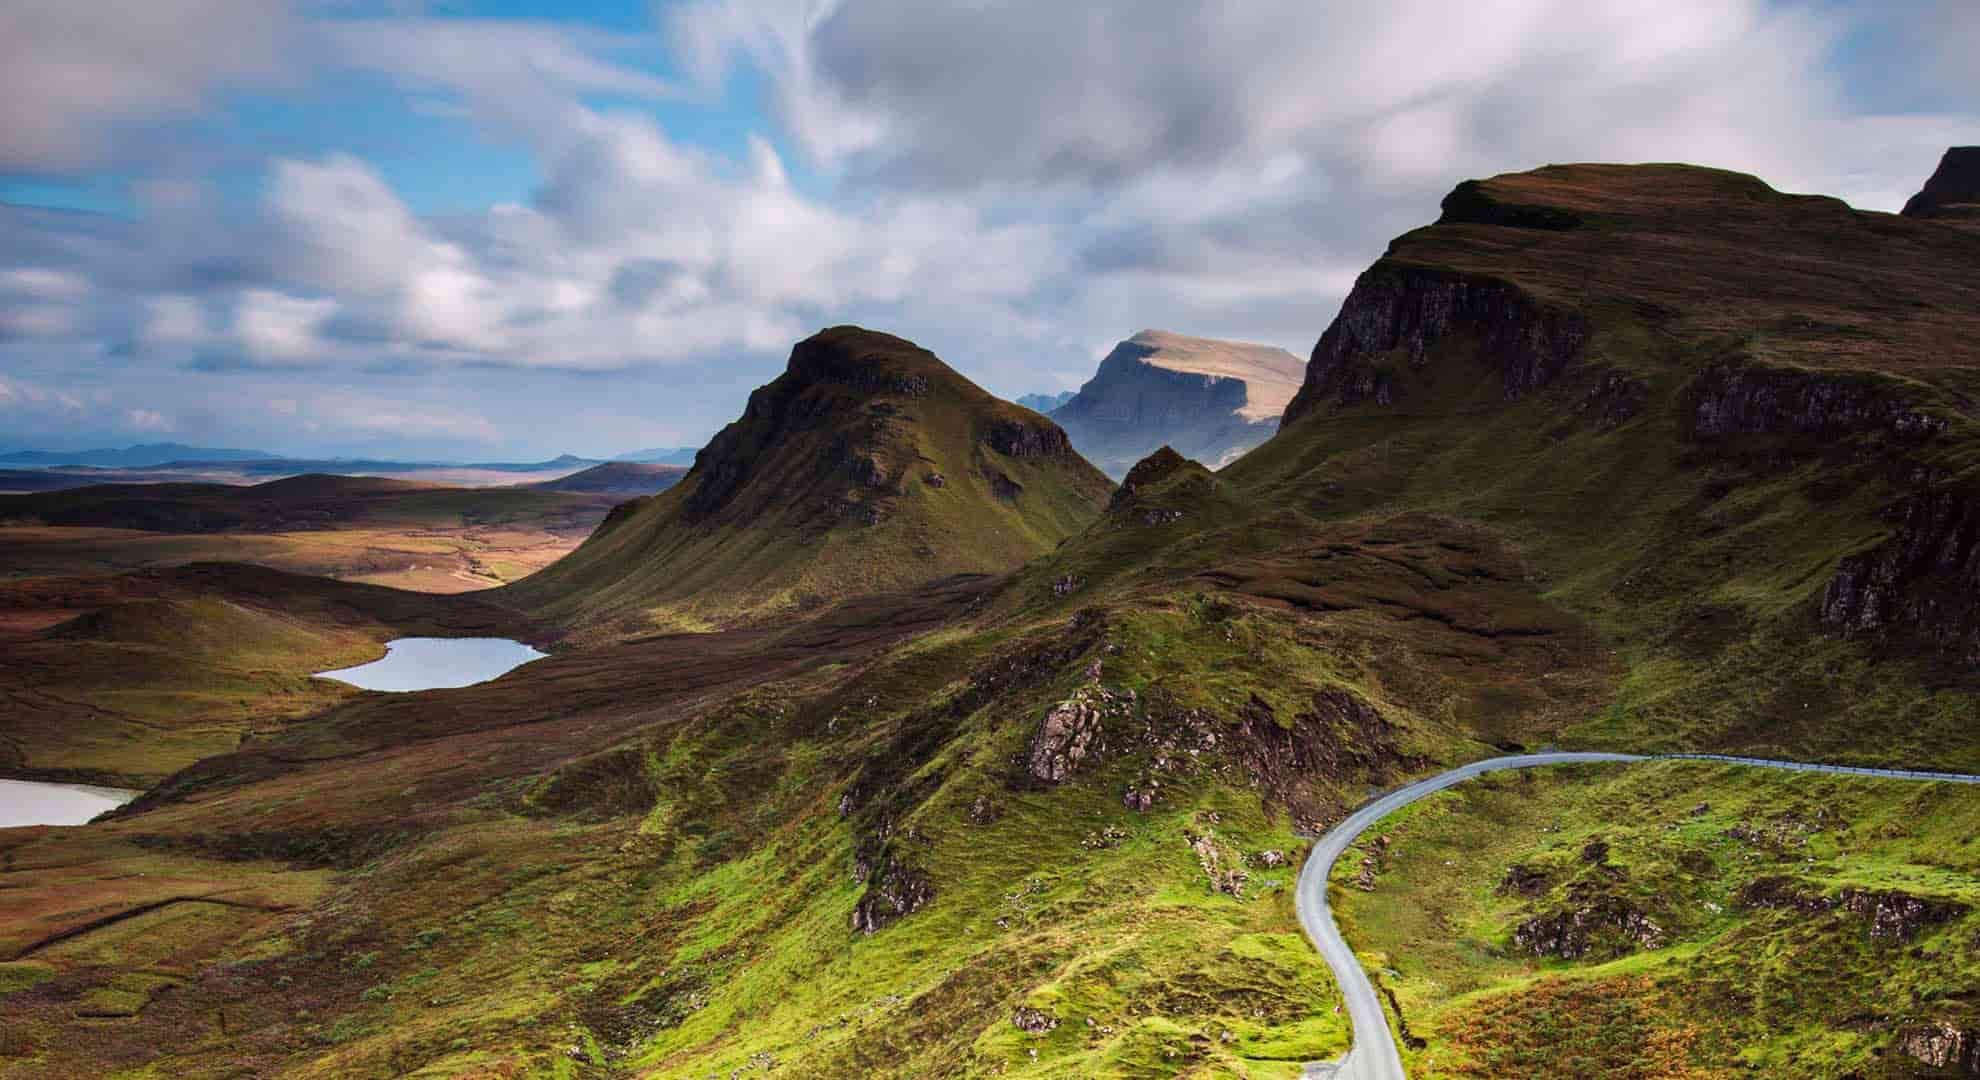 Road in the Quiraing mountains on the Isle of Skye